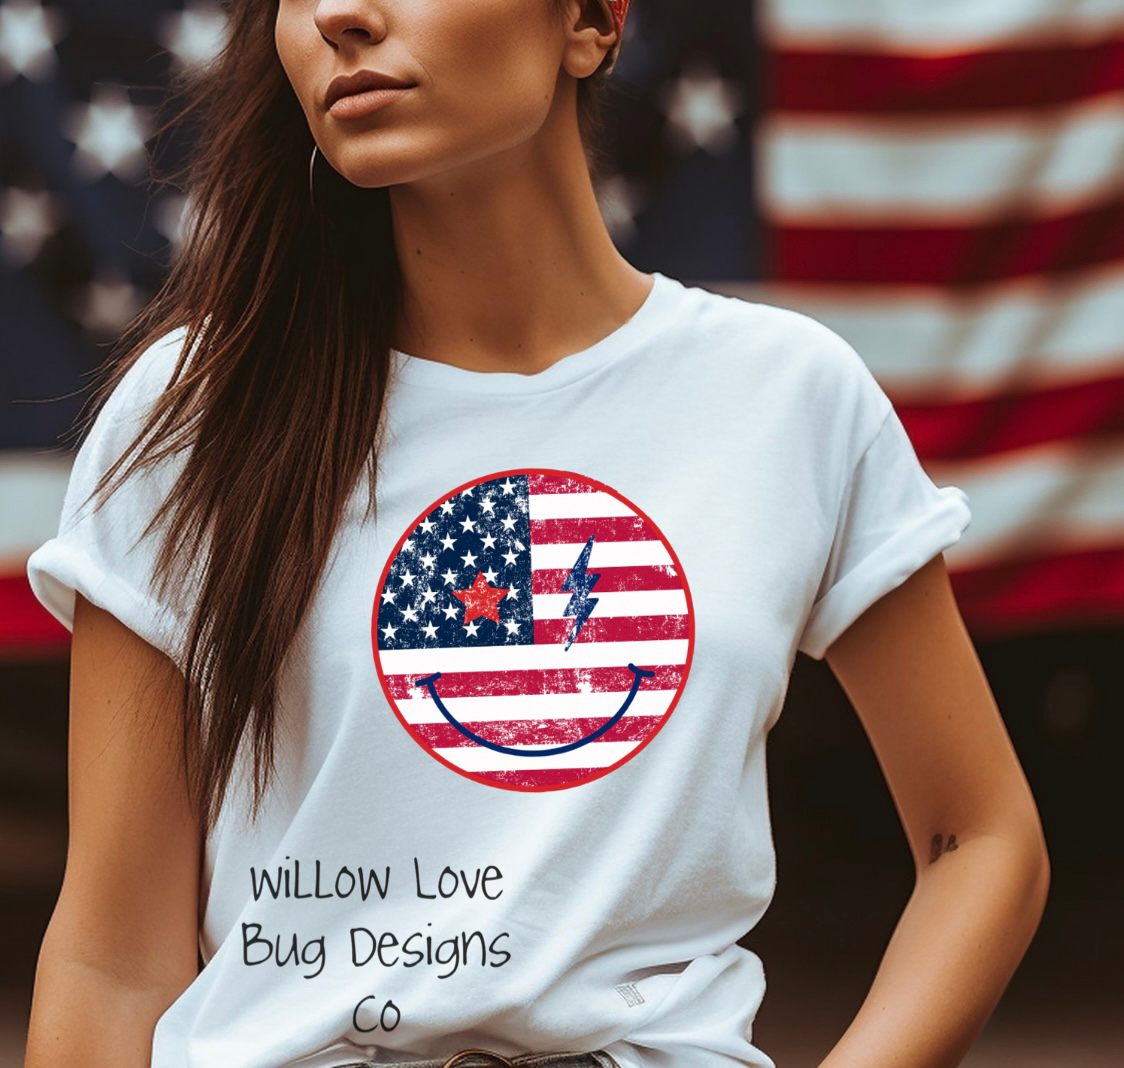 Smiley Patrotic T-Shirt - Willow Love Bug Designs 